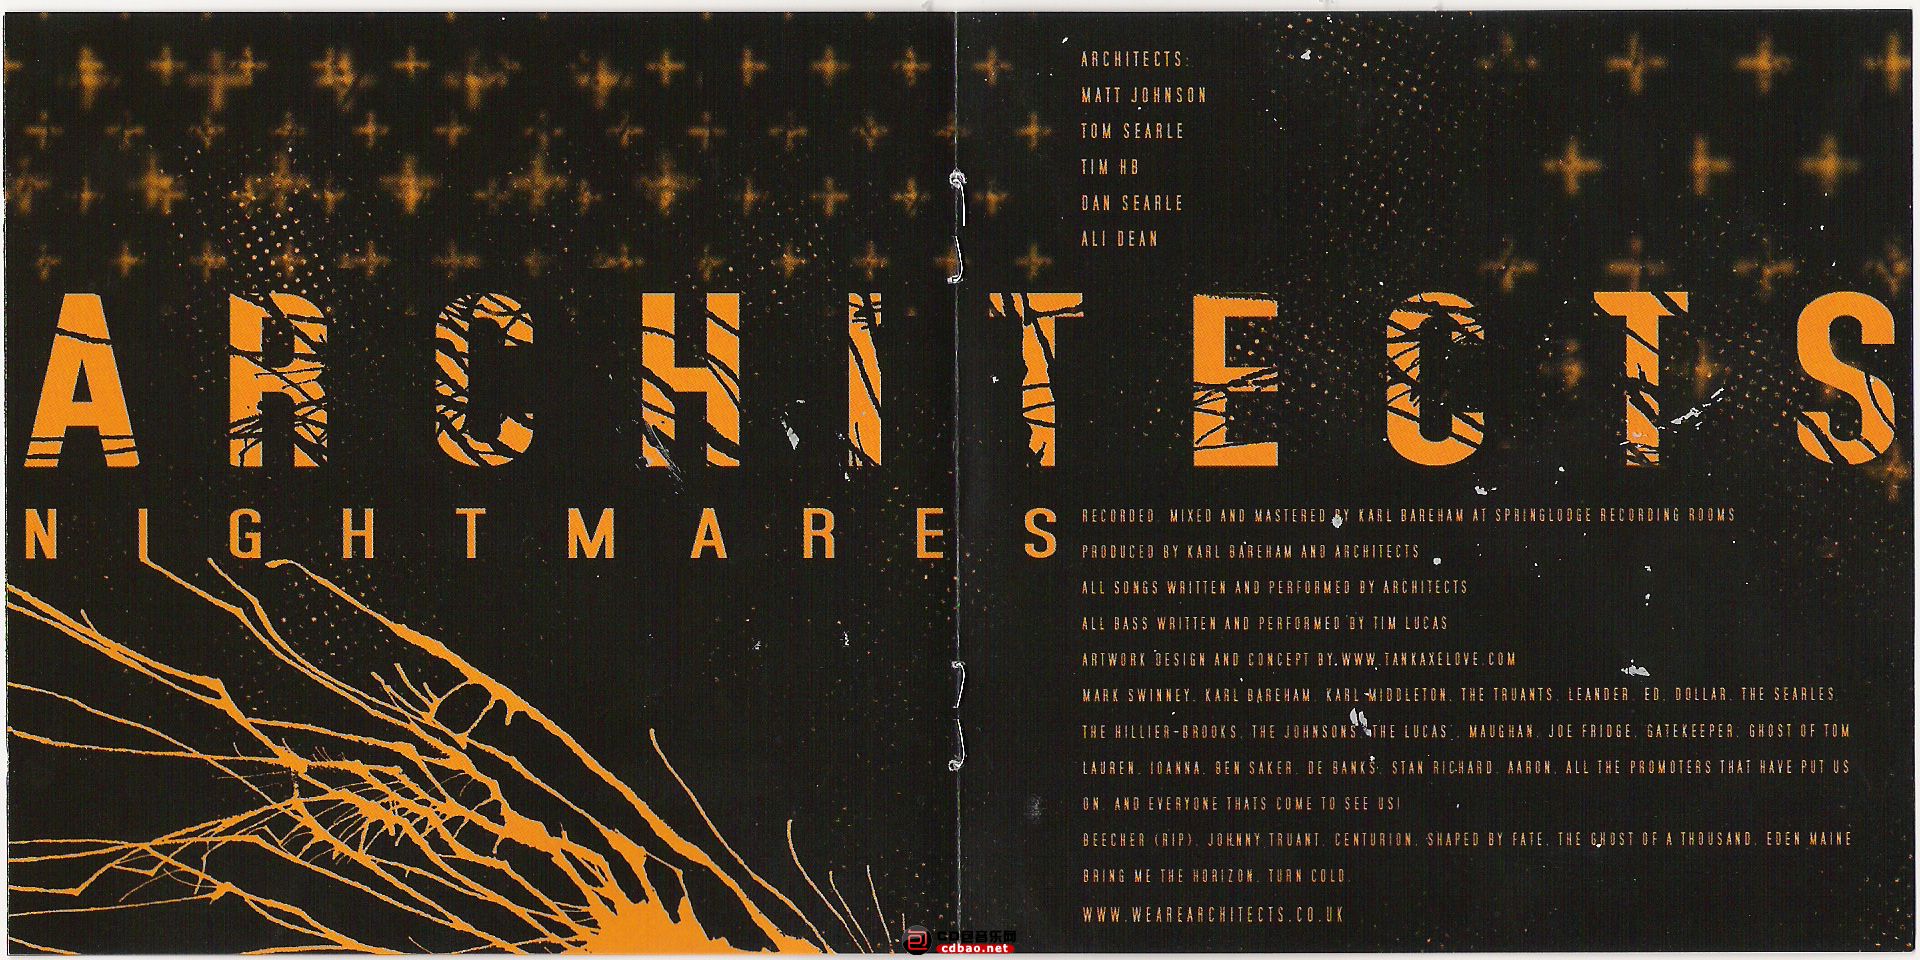 Architects - Nightmares - Booklet.jpg